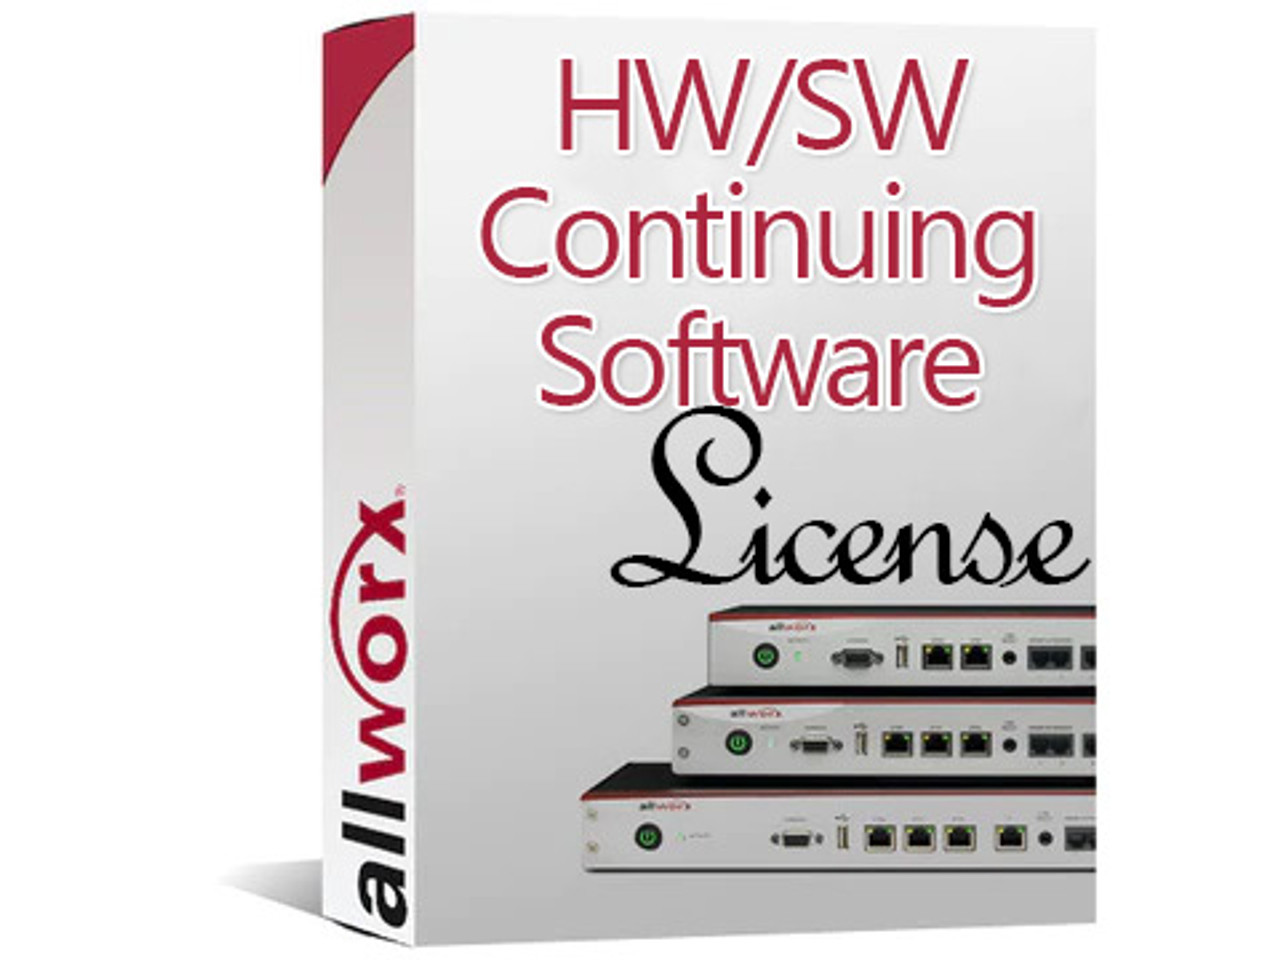 Allworx Connect 324 and 320 Continuing Hardware & Software (8321362)